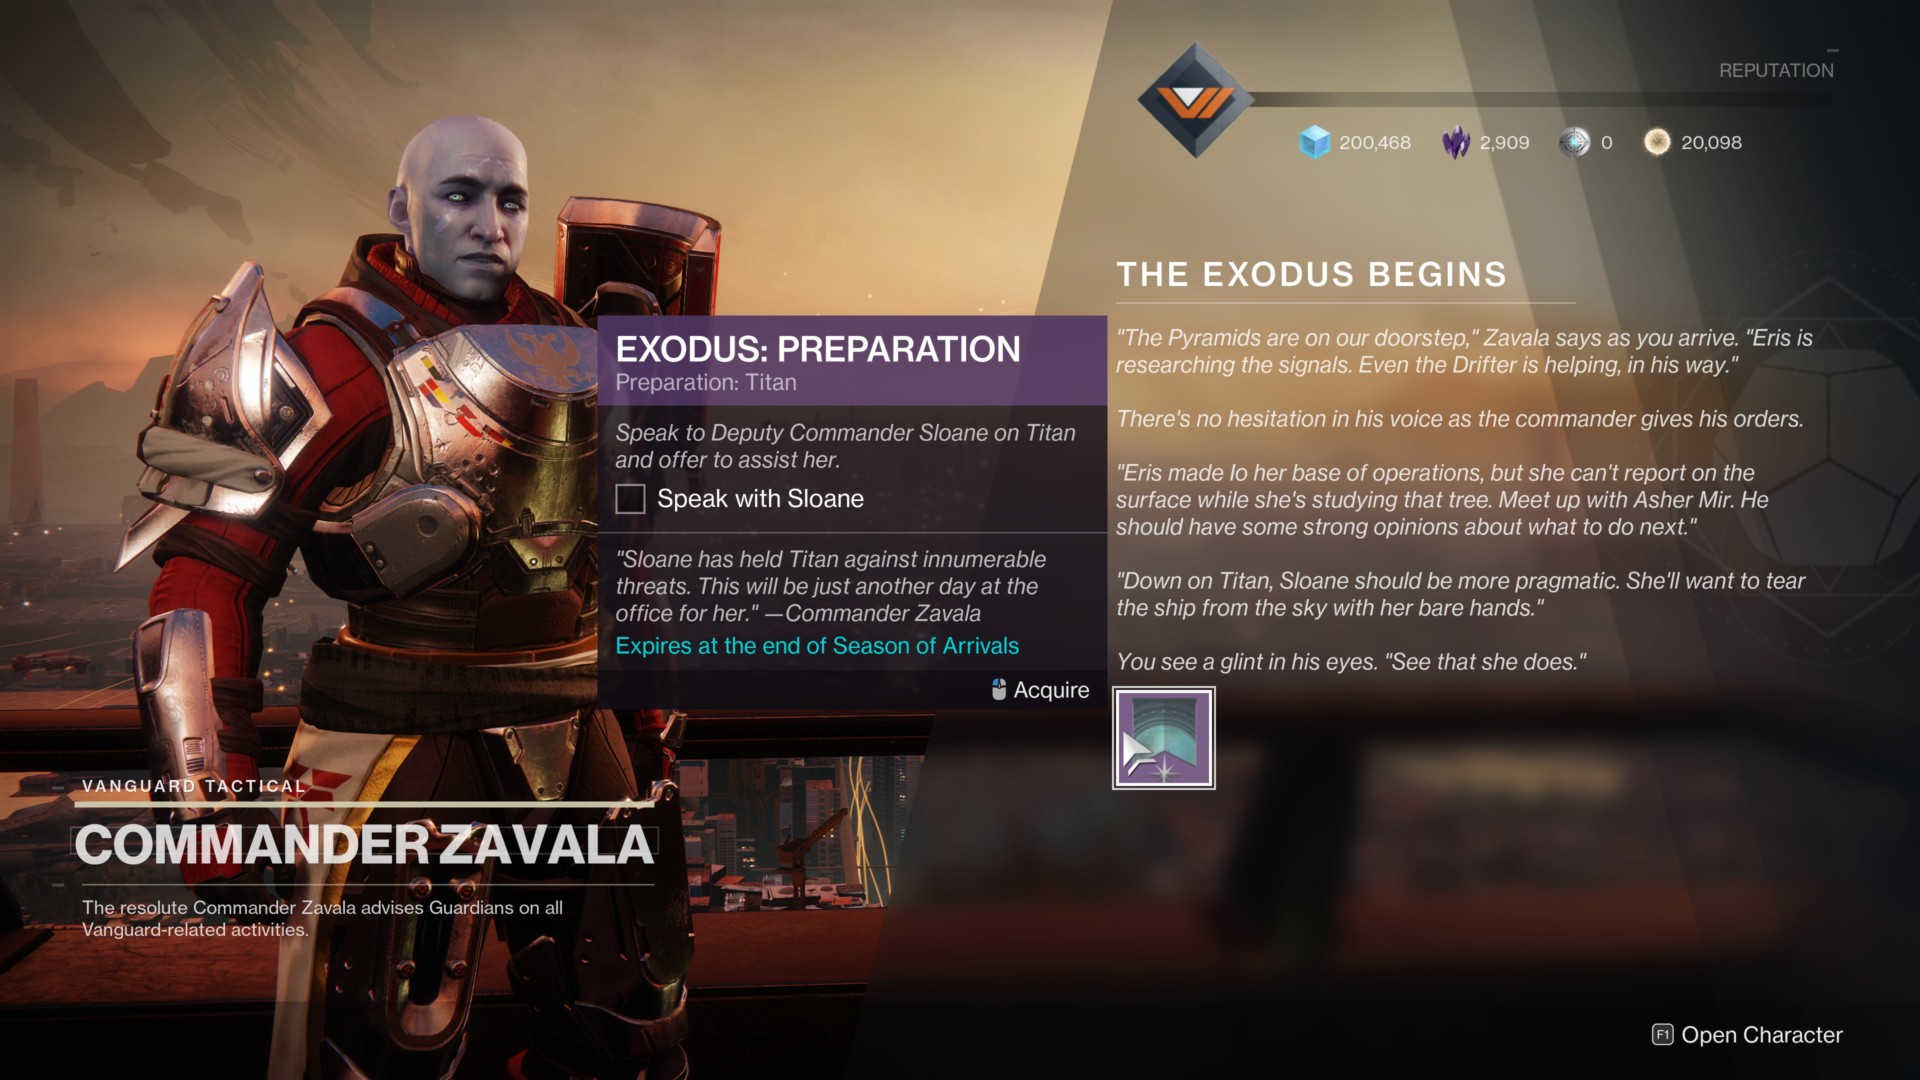 Destiny 2: The Exodus: Preparation quest and reprised Ikelos weapons